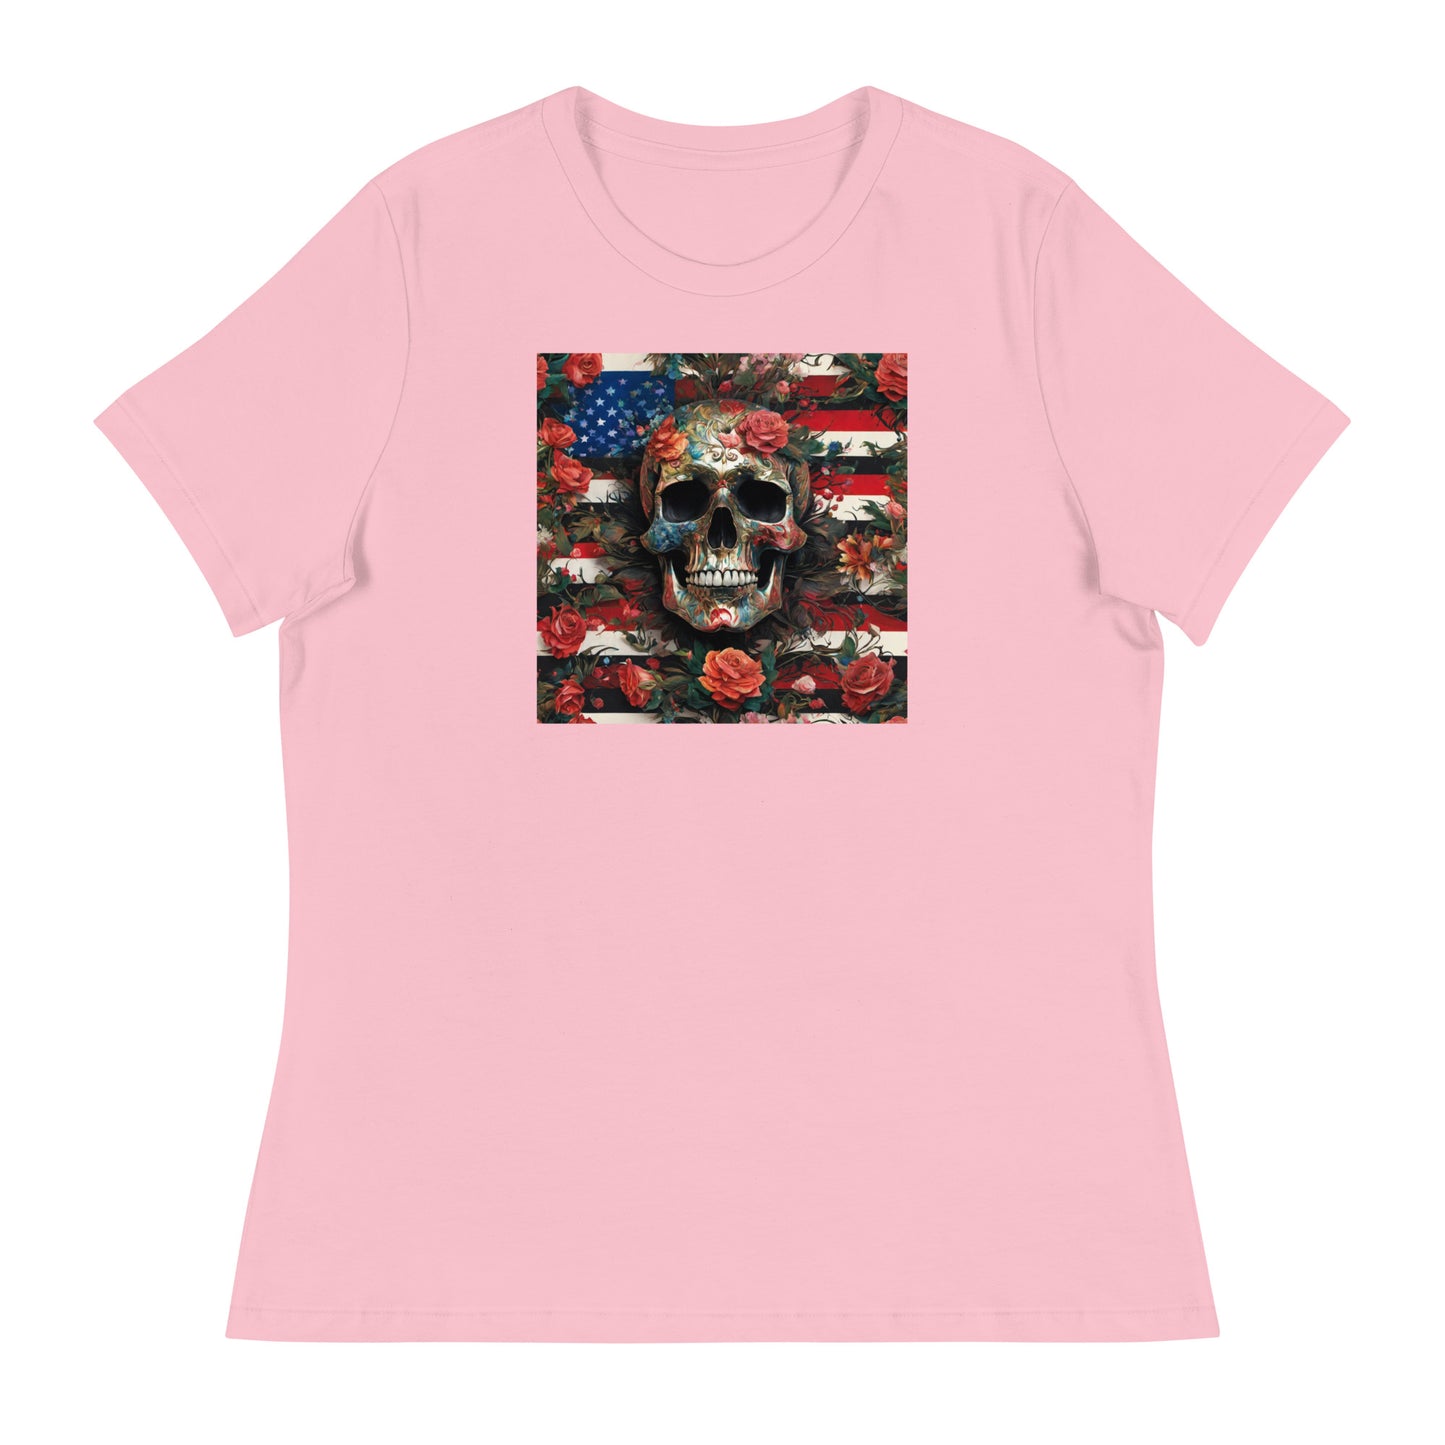 Skull, Roses, and Flag Women's Graphic T-Shirt Pink